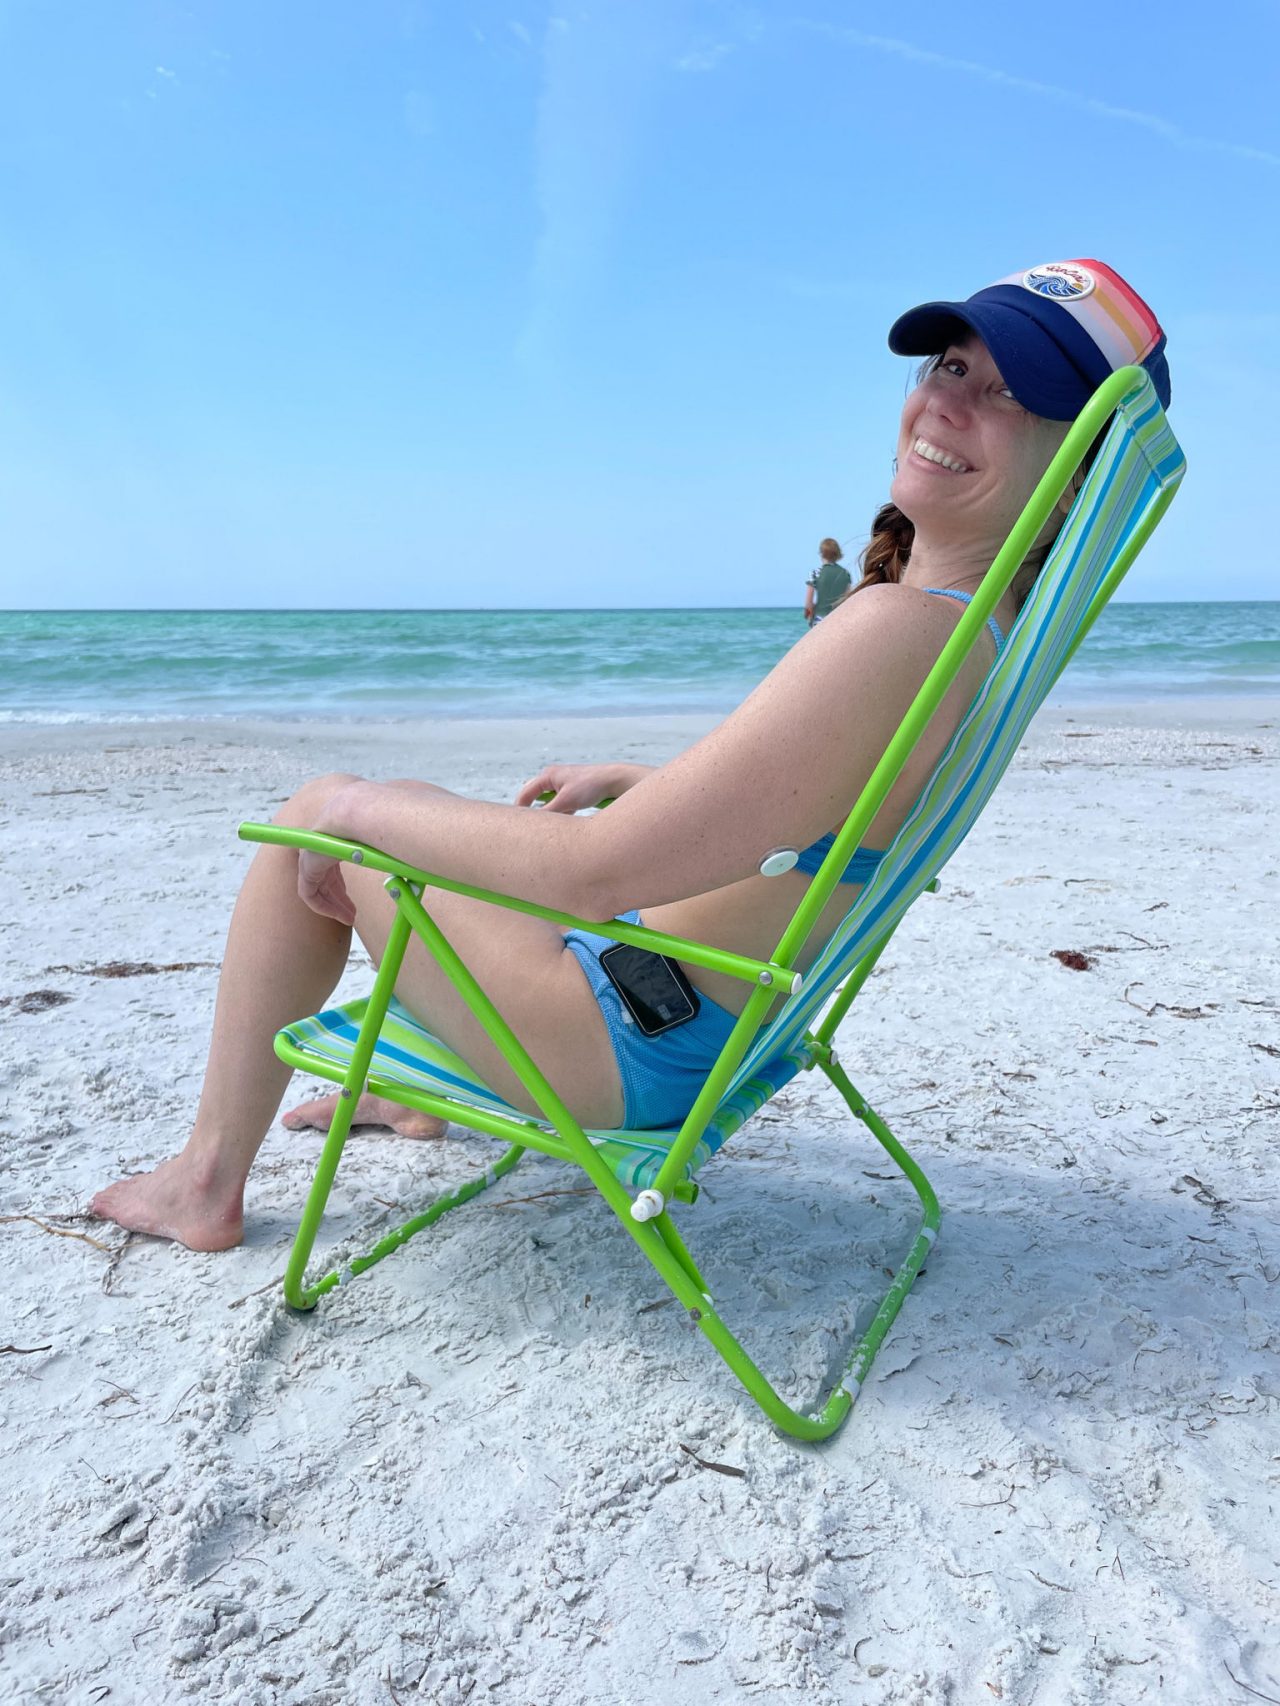 Erin, Blog author, sitting on a beach chair in front of the ocean smiling with FreeStyle Libre sensor visible on the back of her upper arm